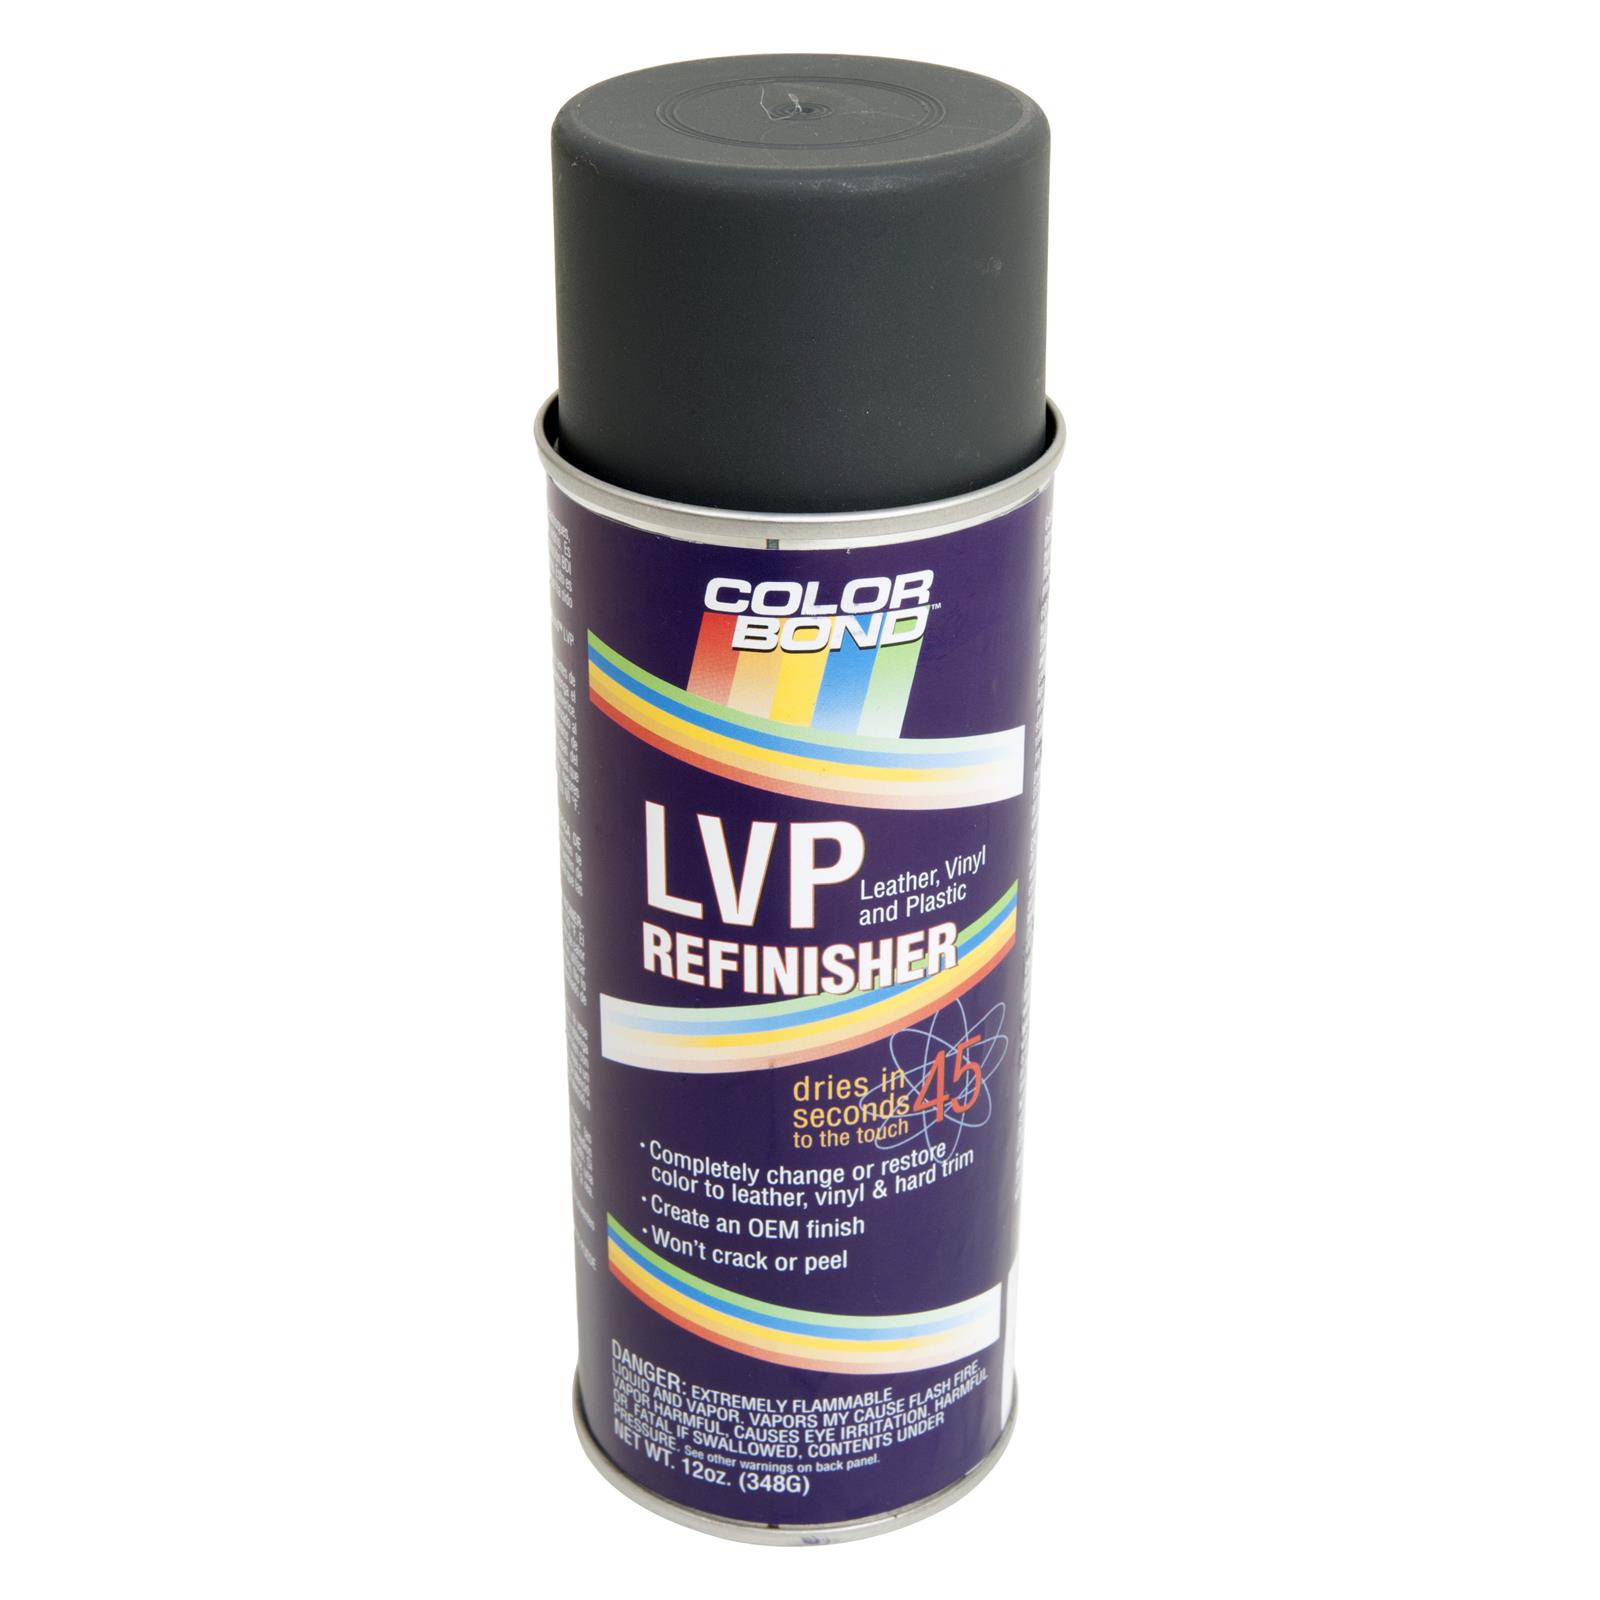 Colorbond 651 Colorbond Leather, Plastic, and Vinyl Refinisher